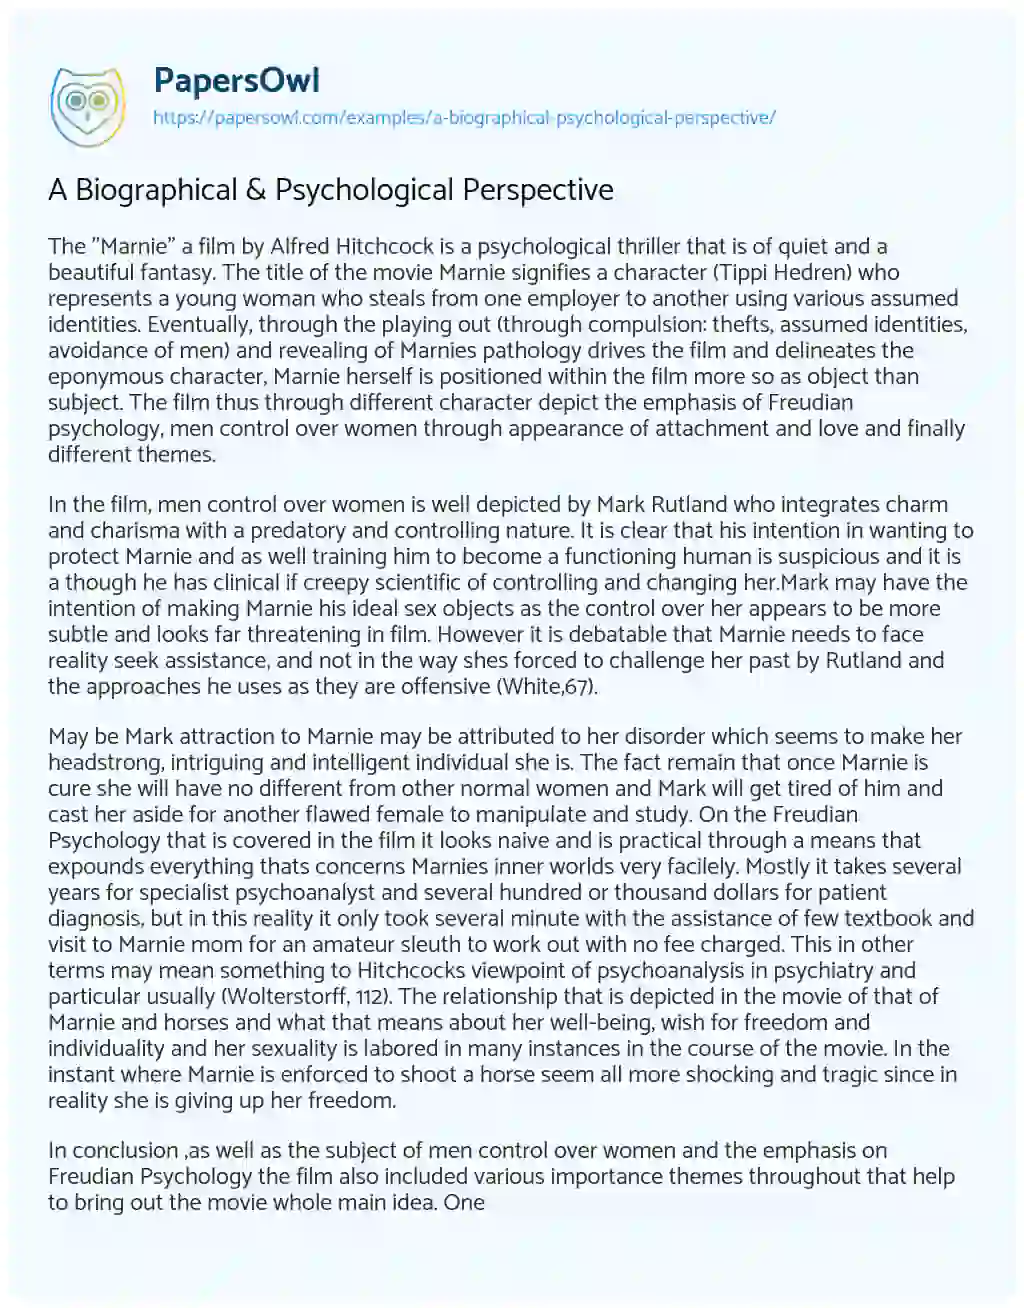 Essay on A Biographical & Psychological Perspective